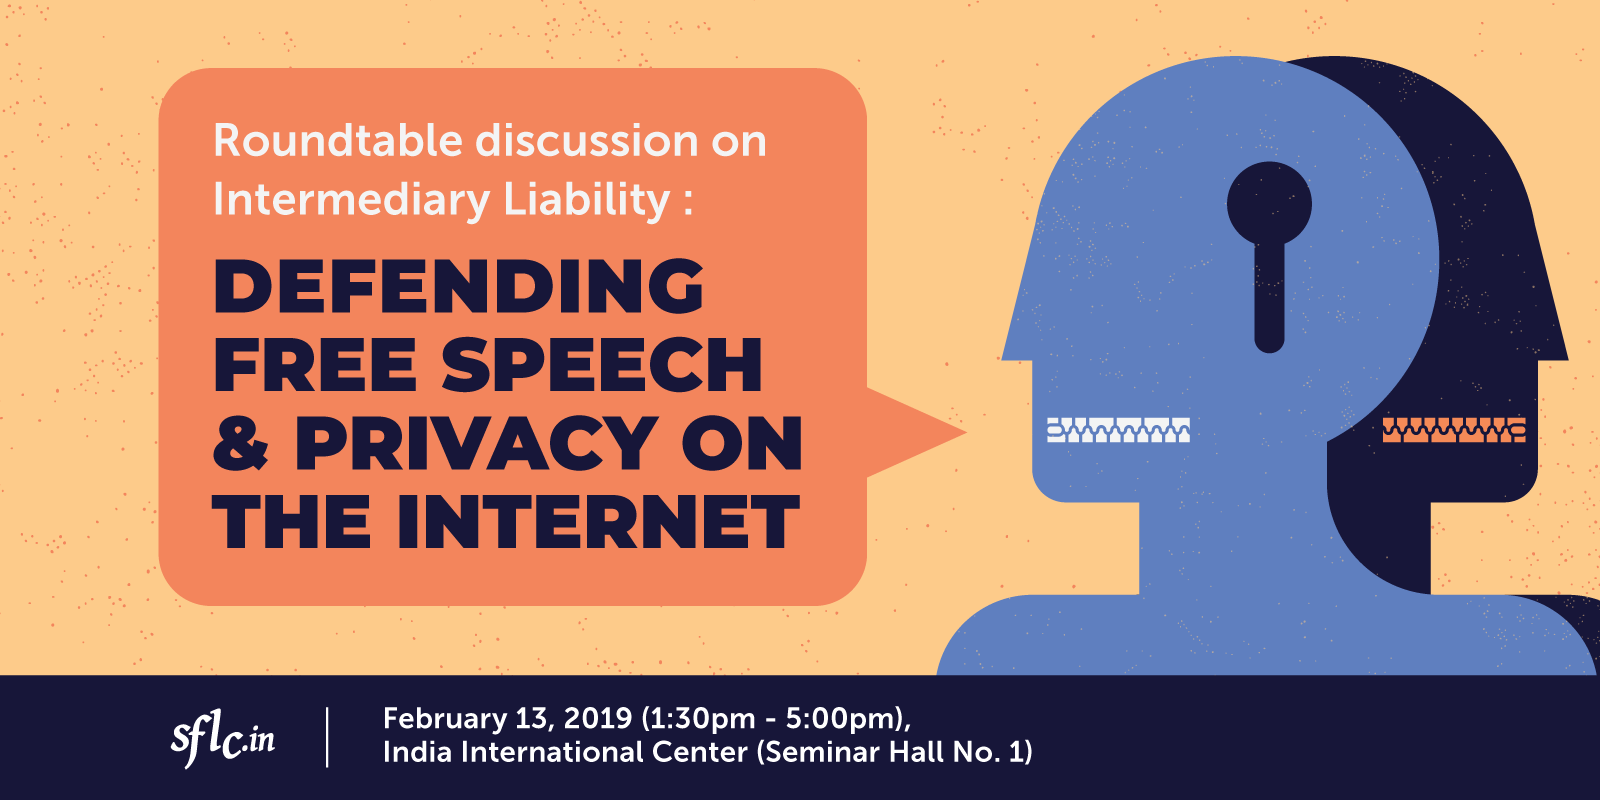 Summary Report: ‘Defending Free Speech and Privacy on the Internet’ A Round Table Discussion on the Future of Intermediary Liability in India